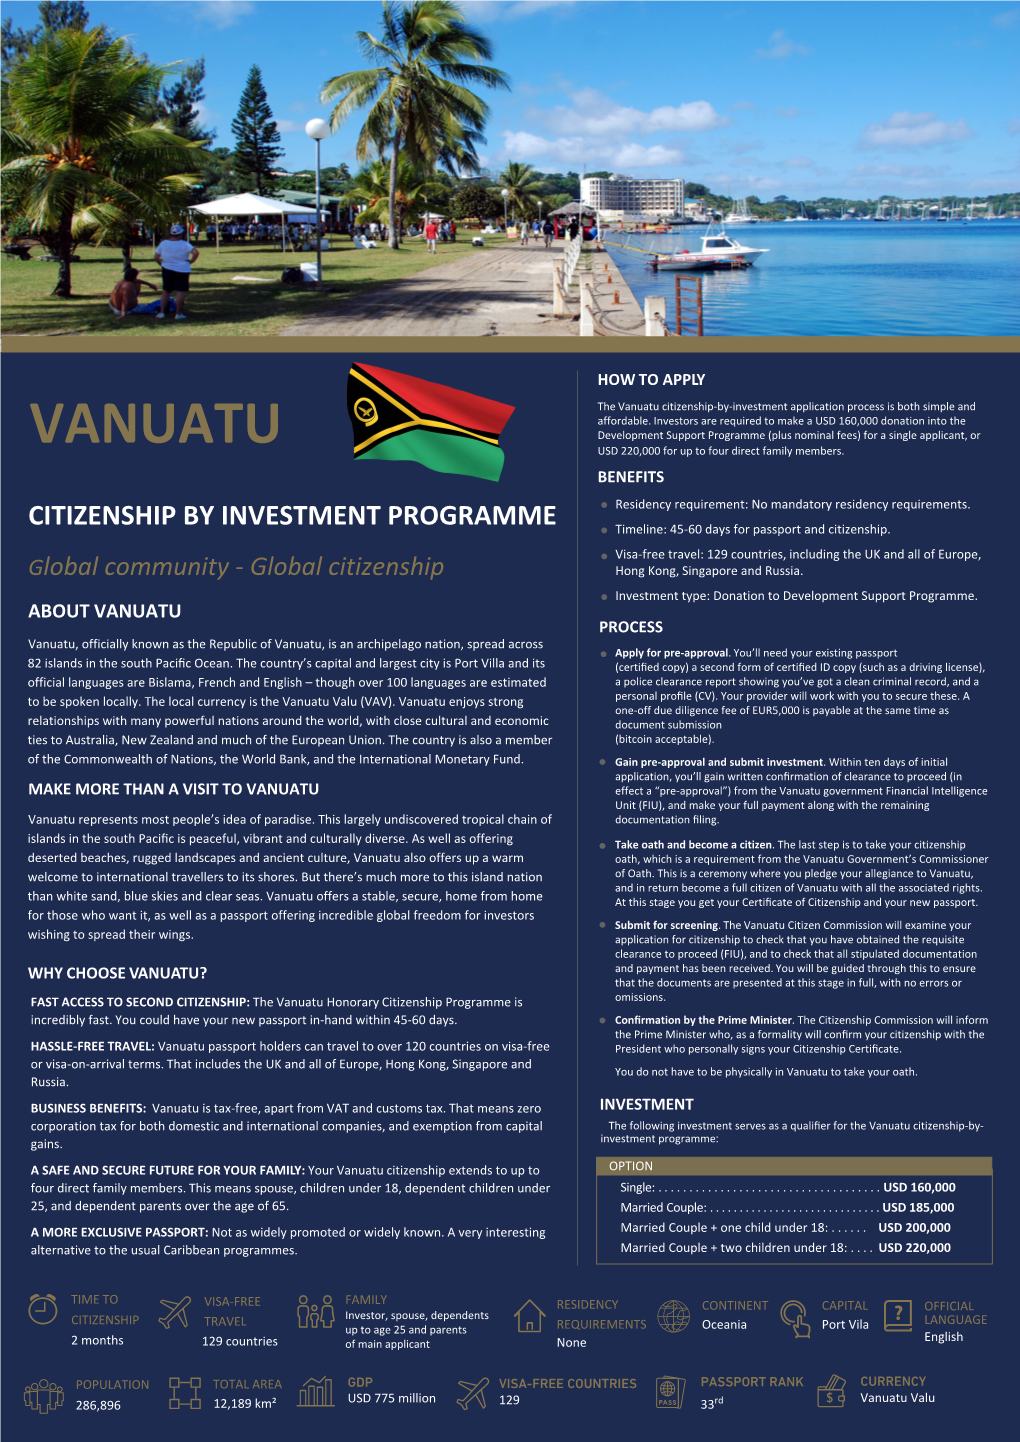 Vanuatu Citizenship-By-Investment Application Process Is Both Simple and Affordable